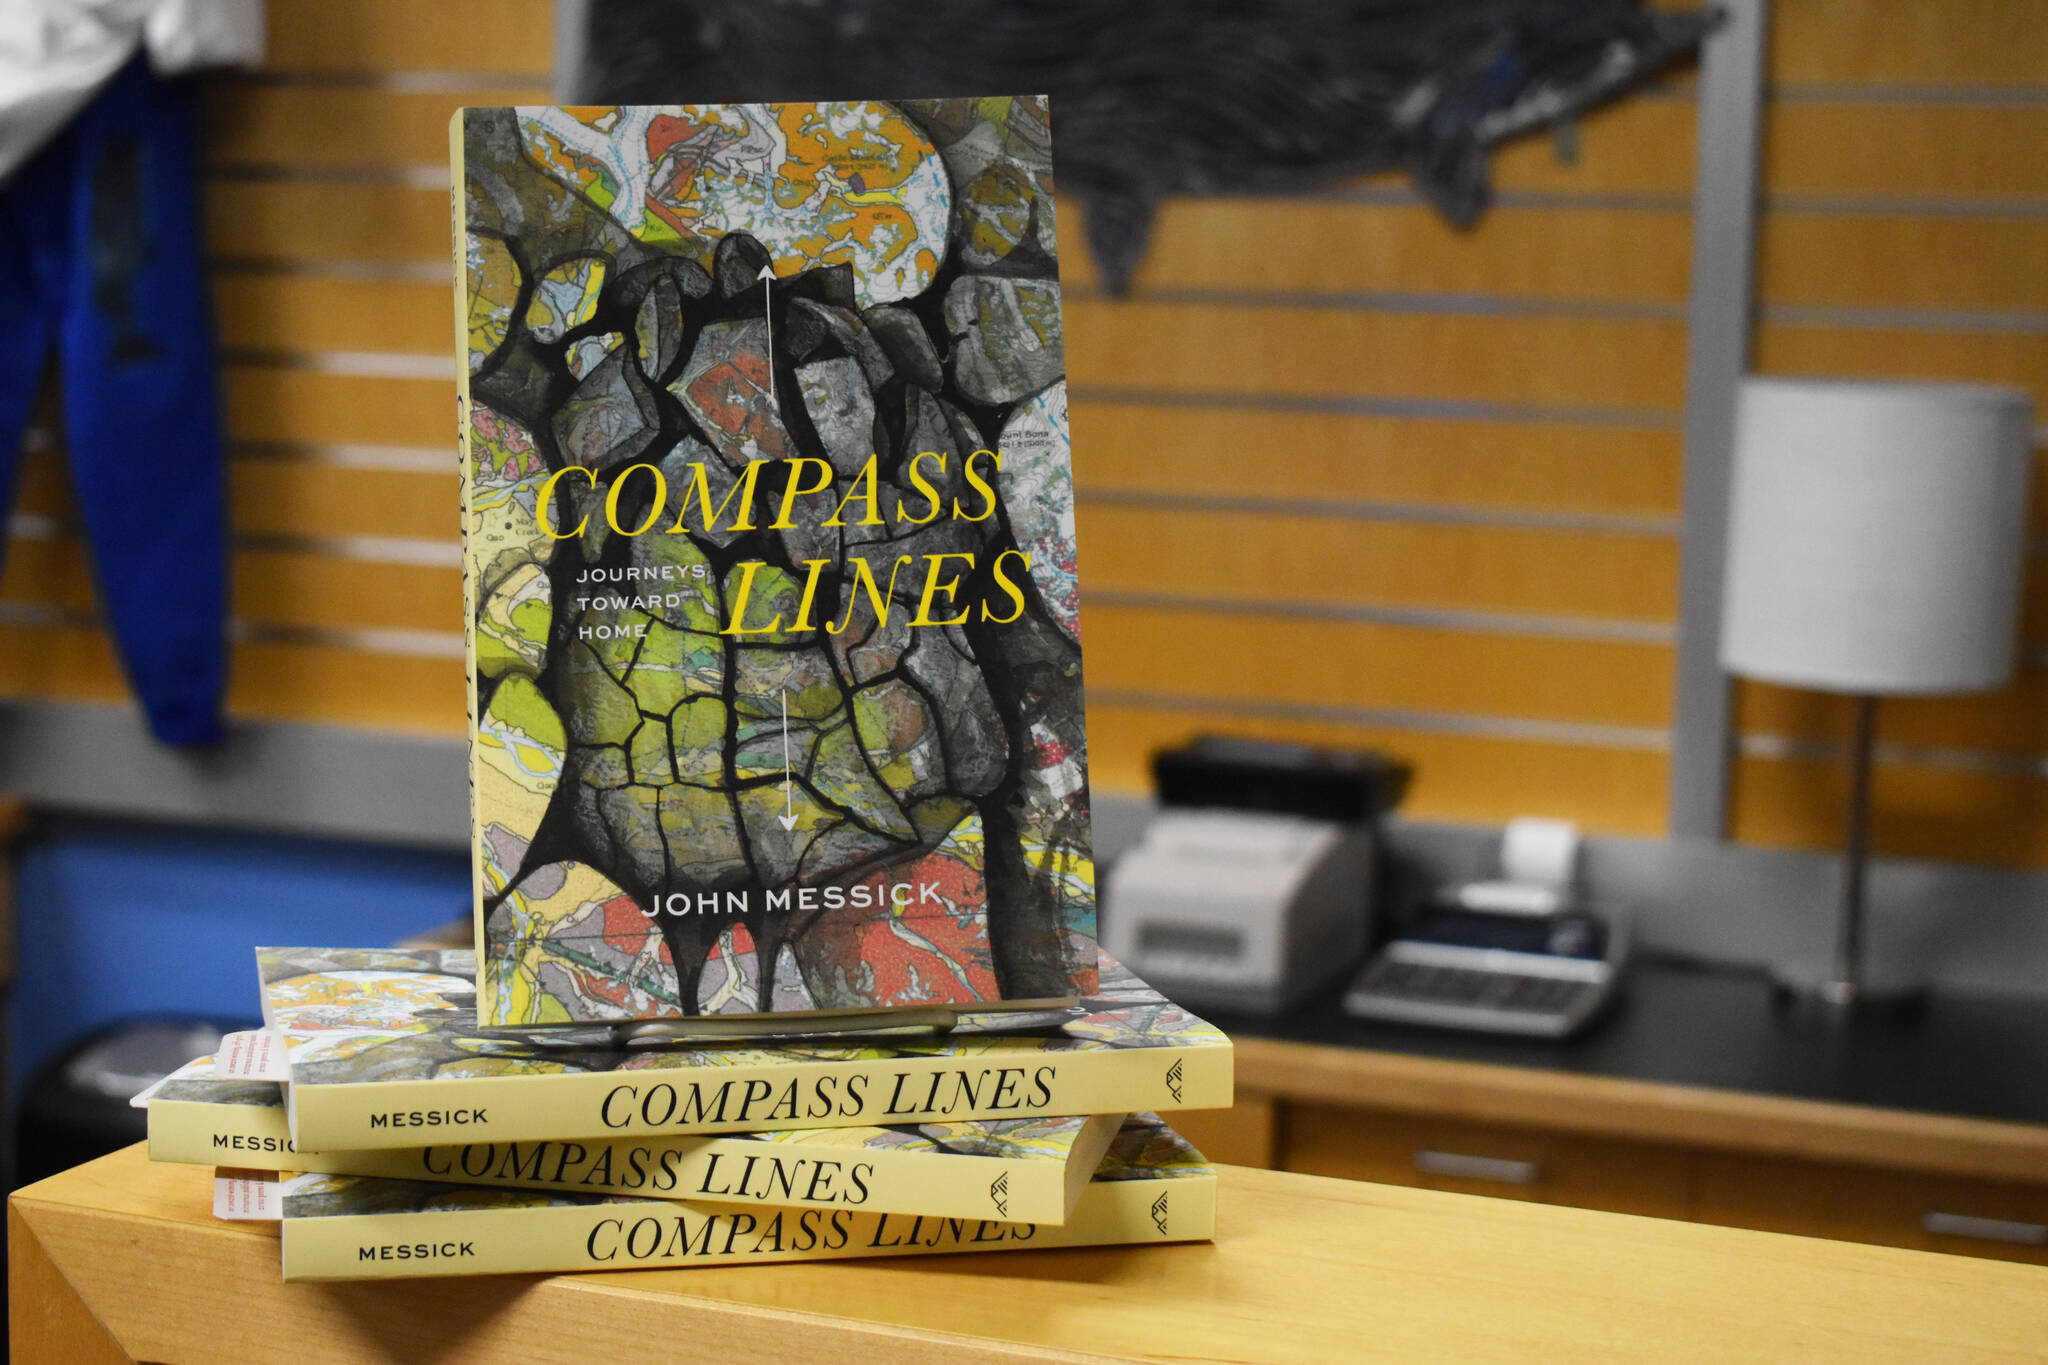 John Messick’s “Compass Lines” is displayed at the Kenai Peninsula College Bookstore in Soldotna, Alaska on Tuesday, March 28, 2023. The copy at the top of this stack is the same that reporter Jake Dye purchased and read for this review. (Jake Dye/Peninsula Clarion)